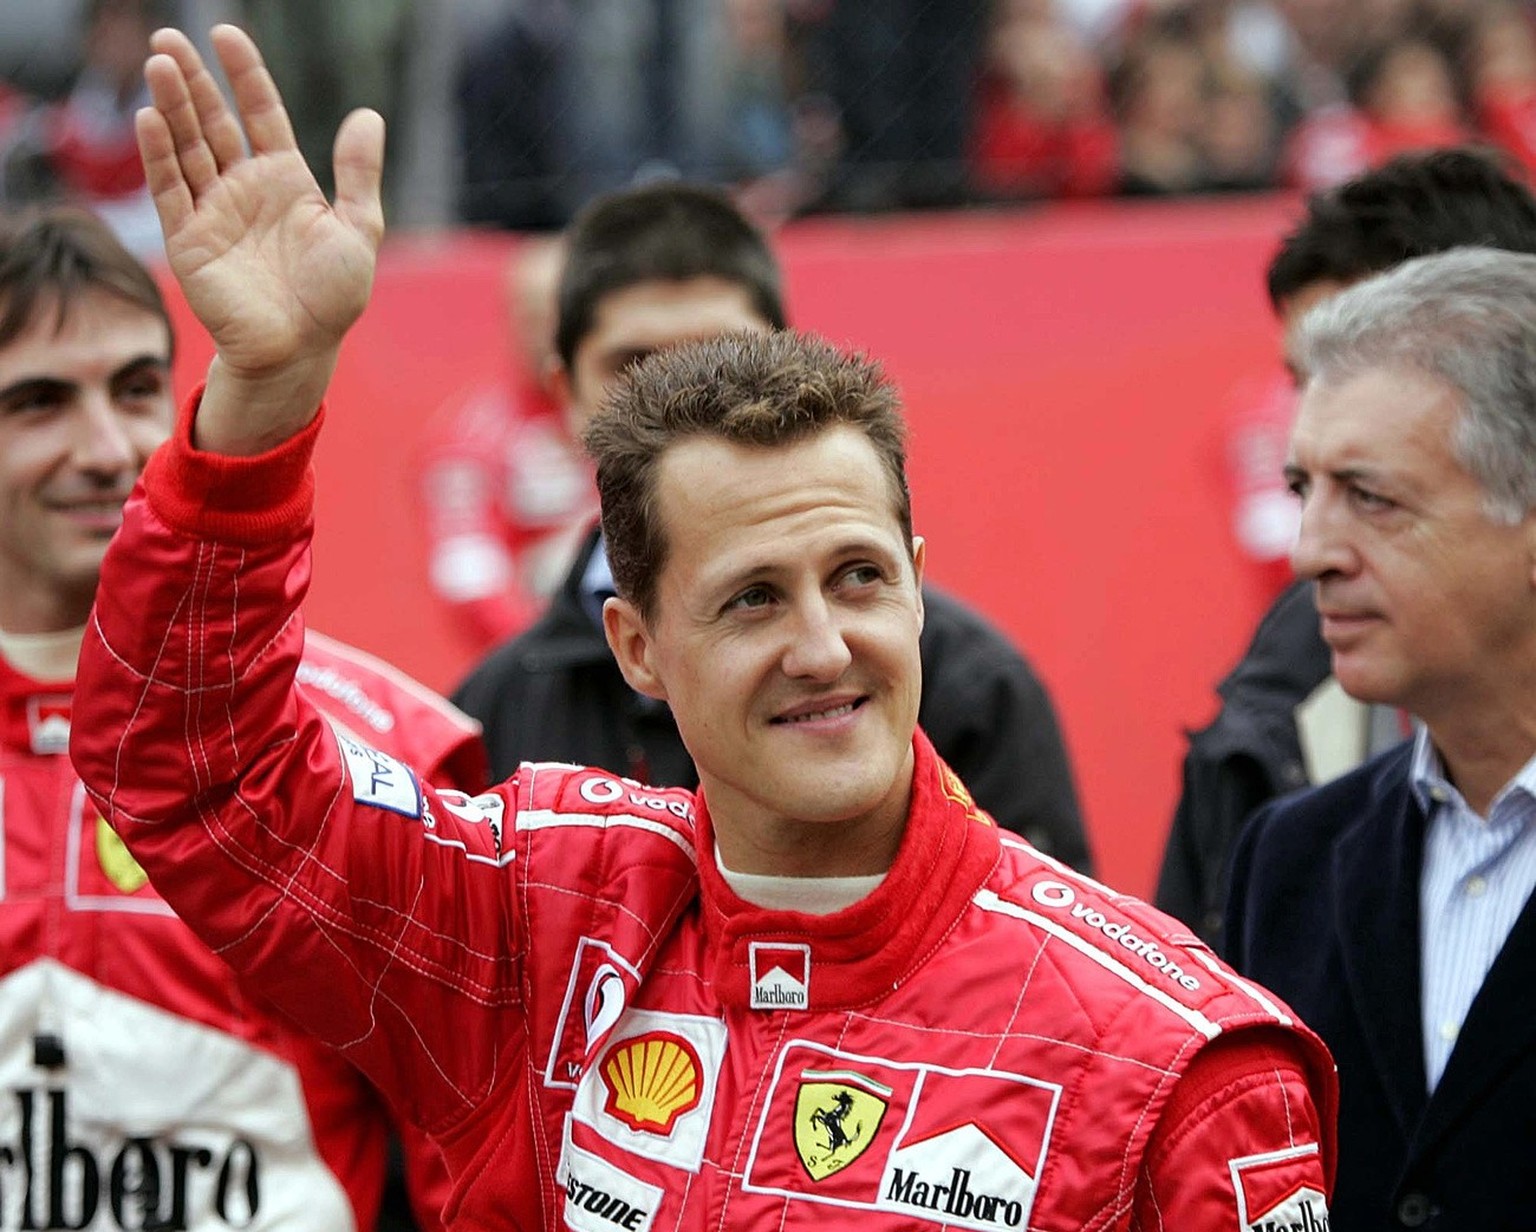 F1 World Champion Michael Schumacher waves to fans at the Monza racetrack, Italy, during a demonstration of the Scuderia Ferrari, Sunday, Oct. 31, 2004. (AP Photo/Luca Bruno)